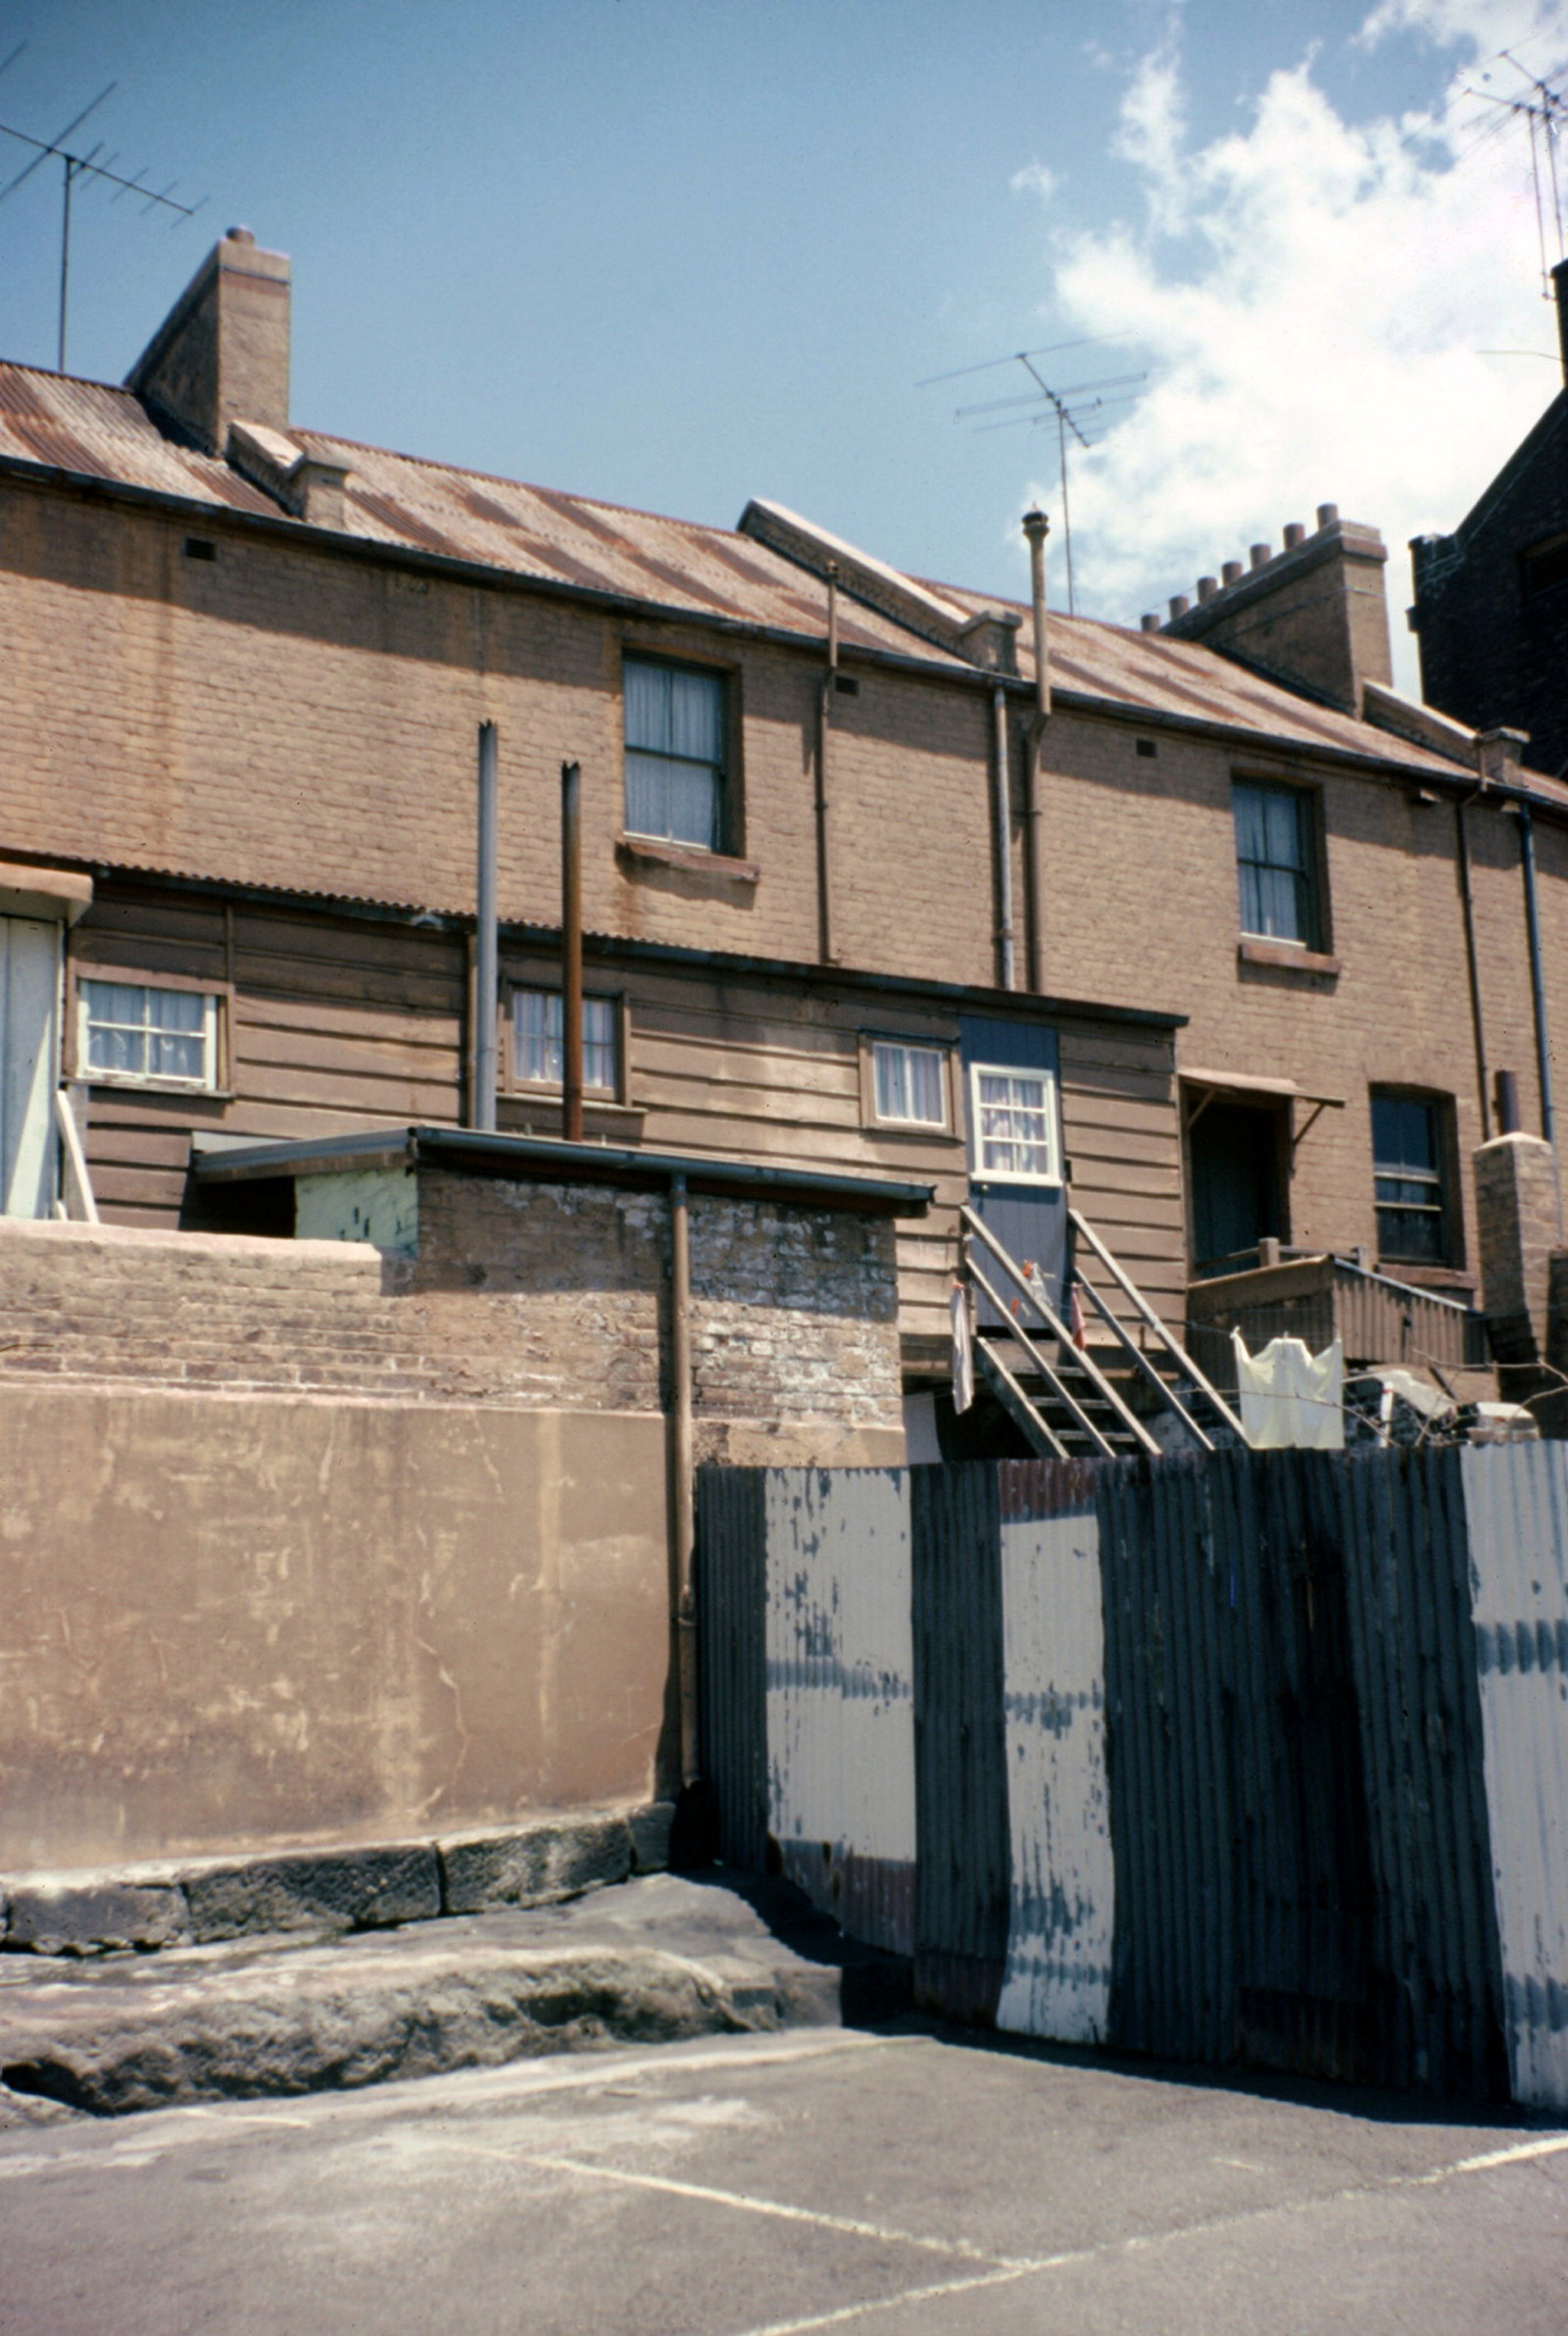 Back view of row of terrace houses showing fences and yards.